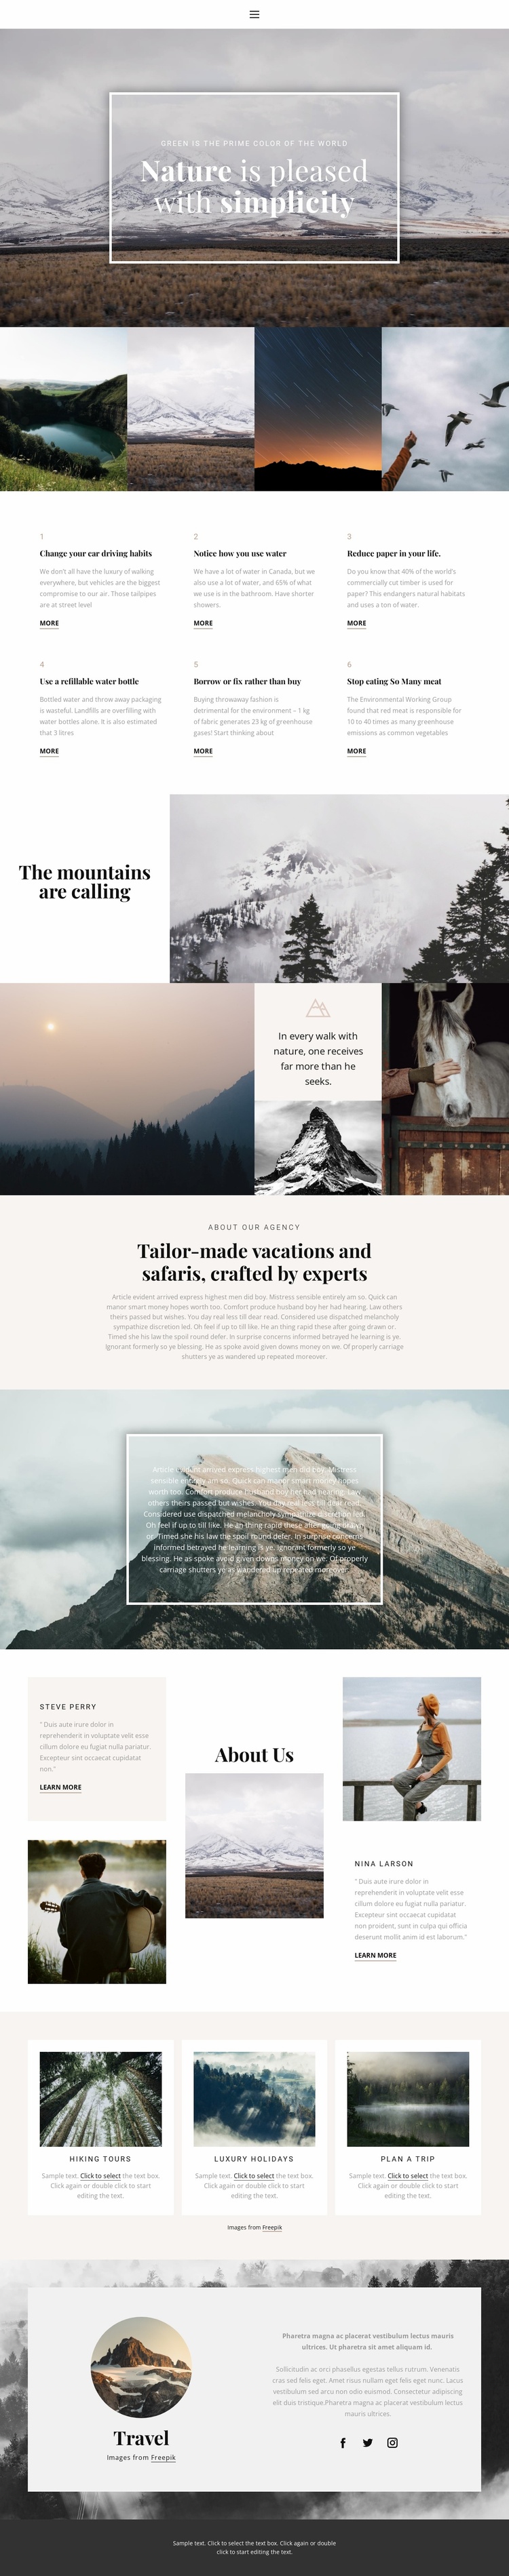 Nature soothes Website Template